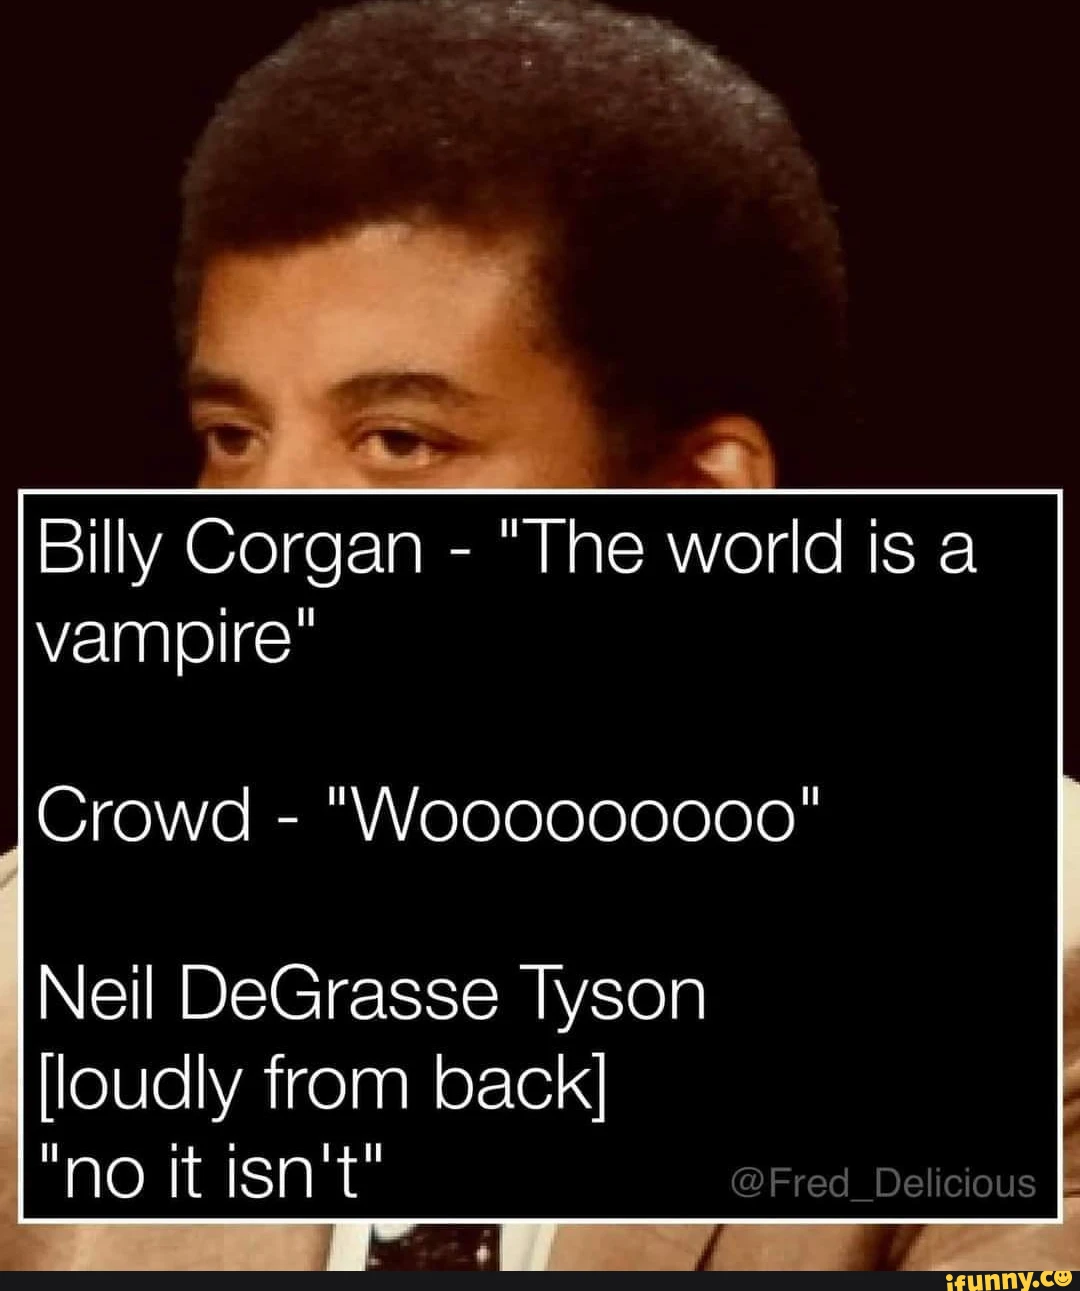 Billy Corgan - "The world is a vampire" Crowd - Neil DeGrasse Tyson [loudly from back] "no it isn't" @Fred Delicious